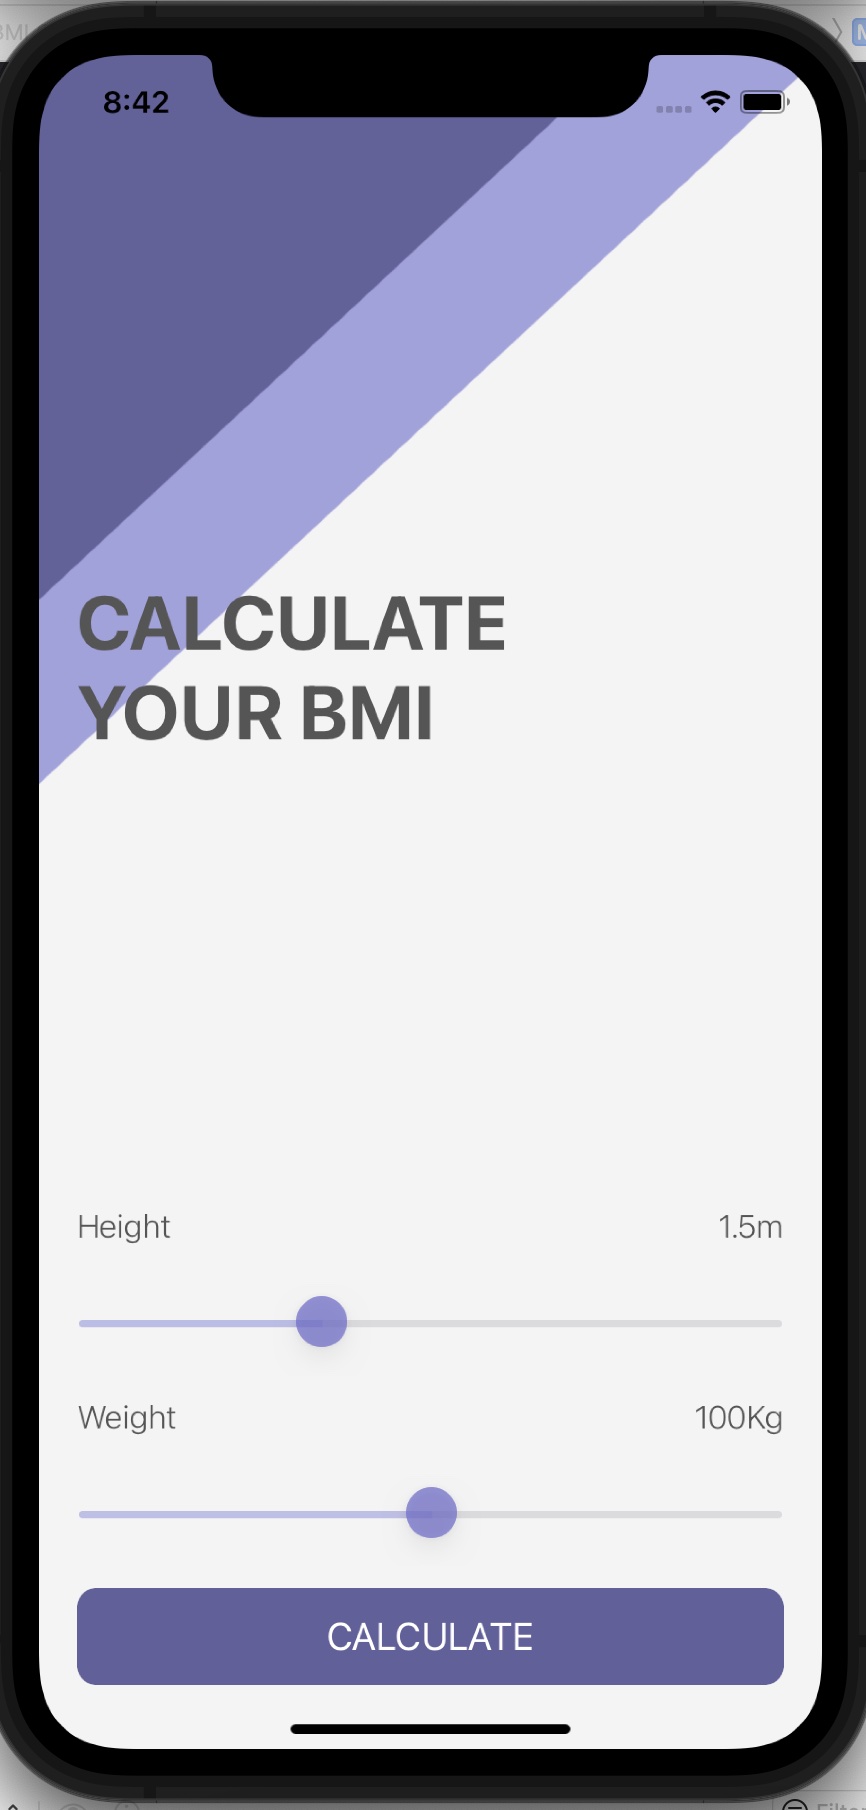 A screenshot of the BMI calculator app's calculate BMI screen with sliders for weight and height